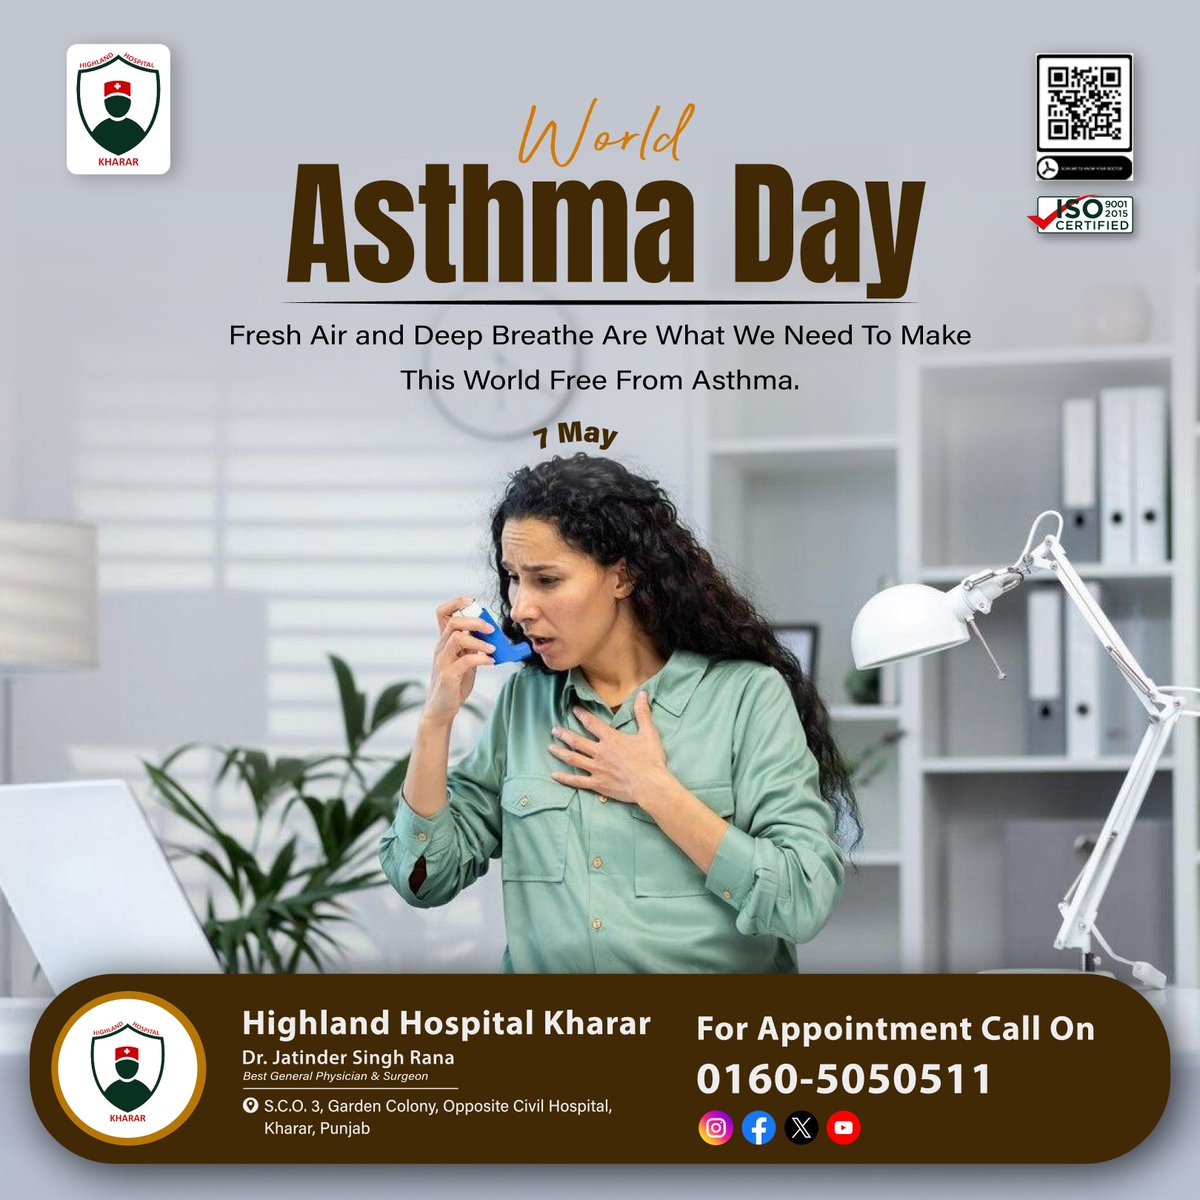 This #WorldAsthmaDay, let's take a deep #breath with #HighlandHospitalKharar. #Asthma can't define you, your strength does. Let's stand together in the fight against asthma!
.
#Healthcare #MedicalCare #FightAsthma #Kharar #Mohali #DrJatinderSingh #Besthospital #MedicalSupport